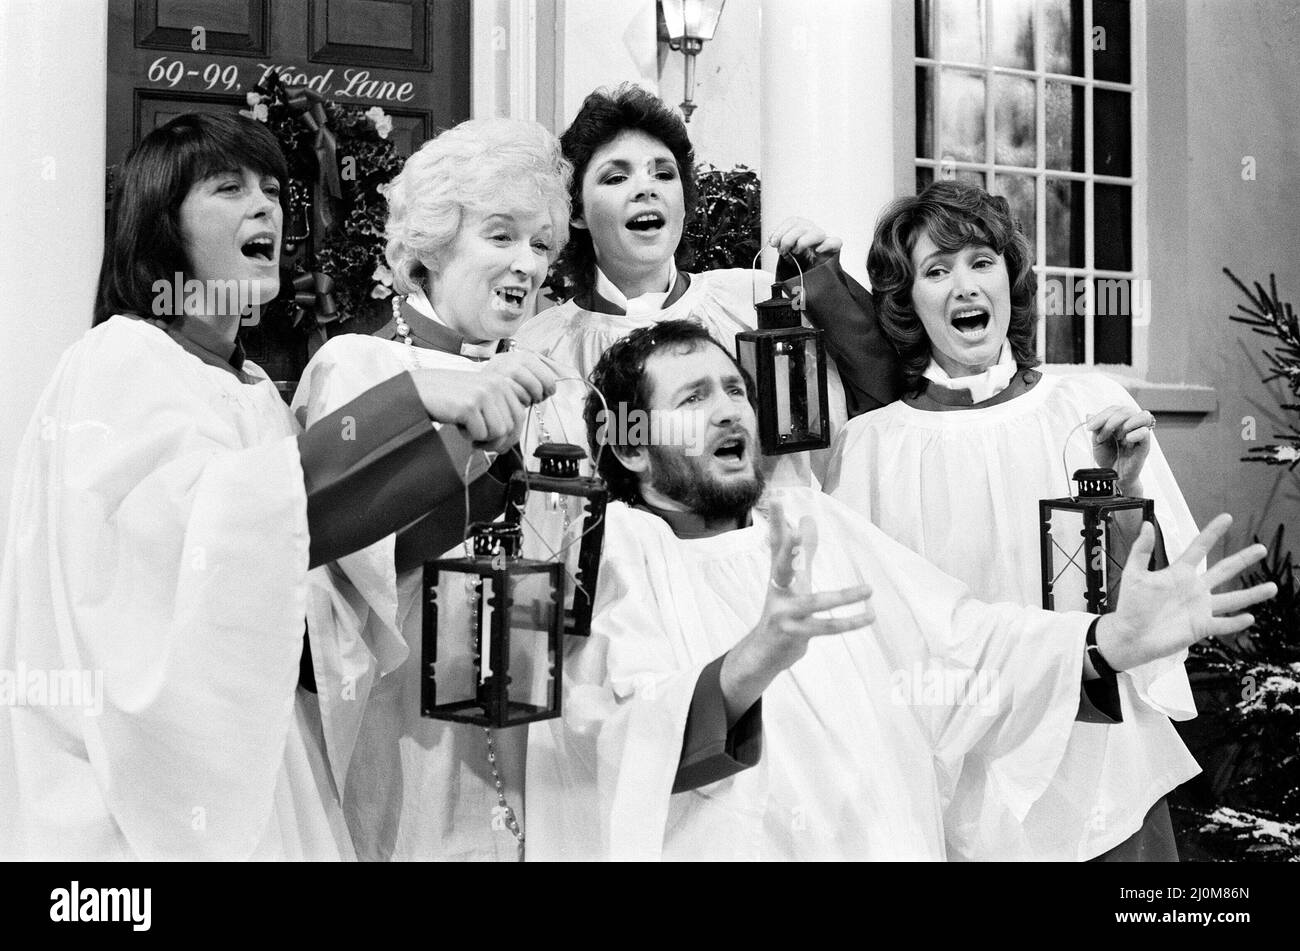 BBC Photo-call to announce this years Christmas line-up and television schedule, BBC Studios, London, 2nd December 1981. Pictured, Isla St Clair, June Whitfield, Dana Rosemary Scallon, Jan Leeming and DJ Kenny Everett. Stock Photo